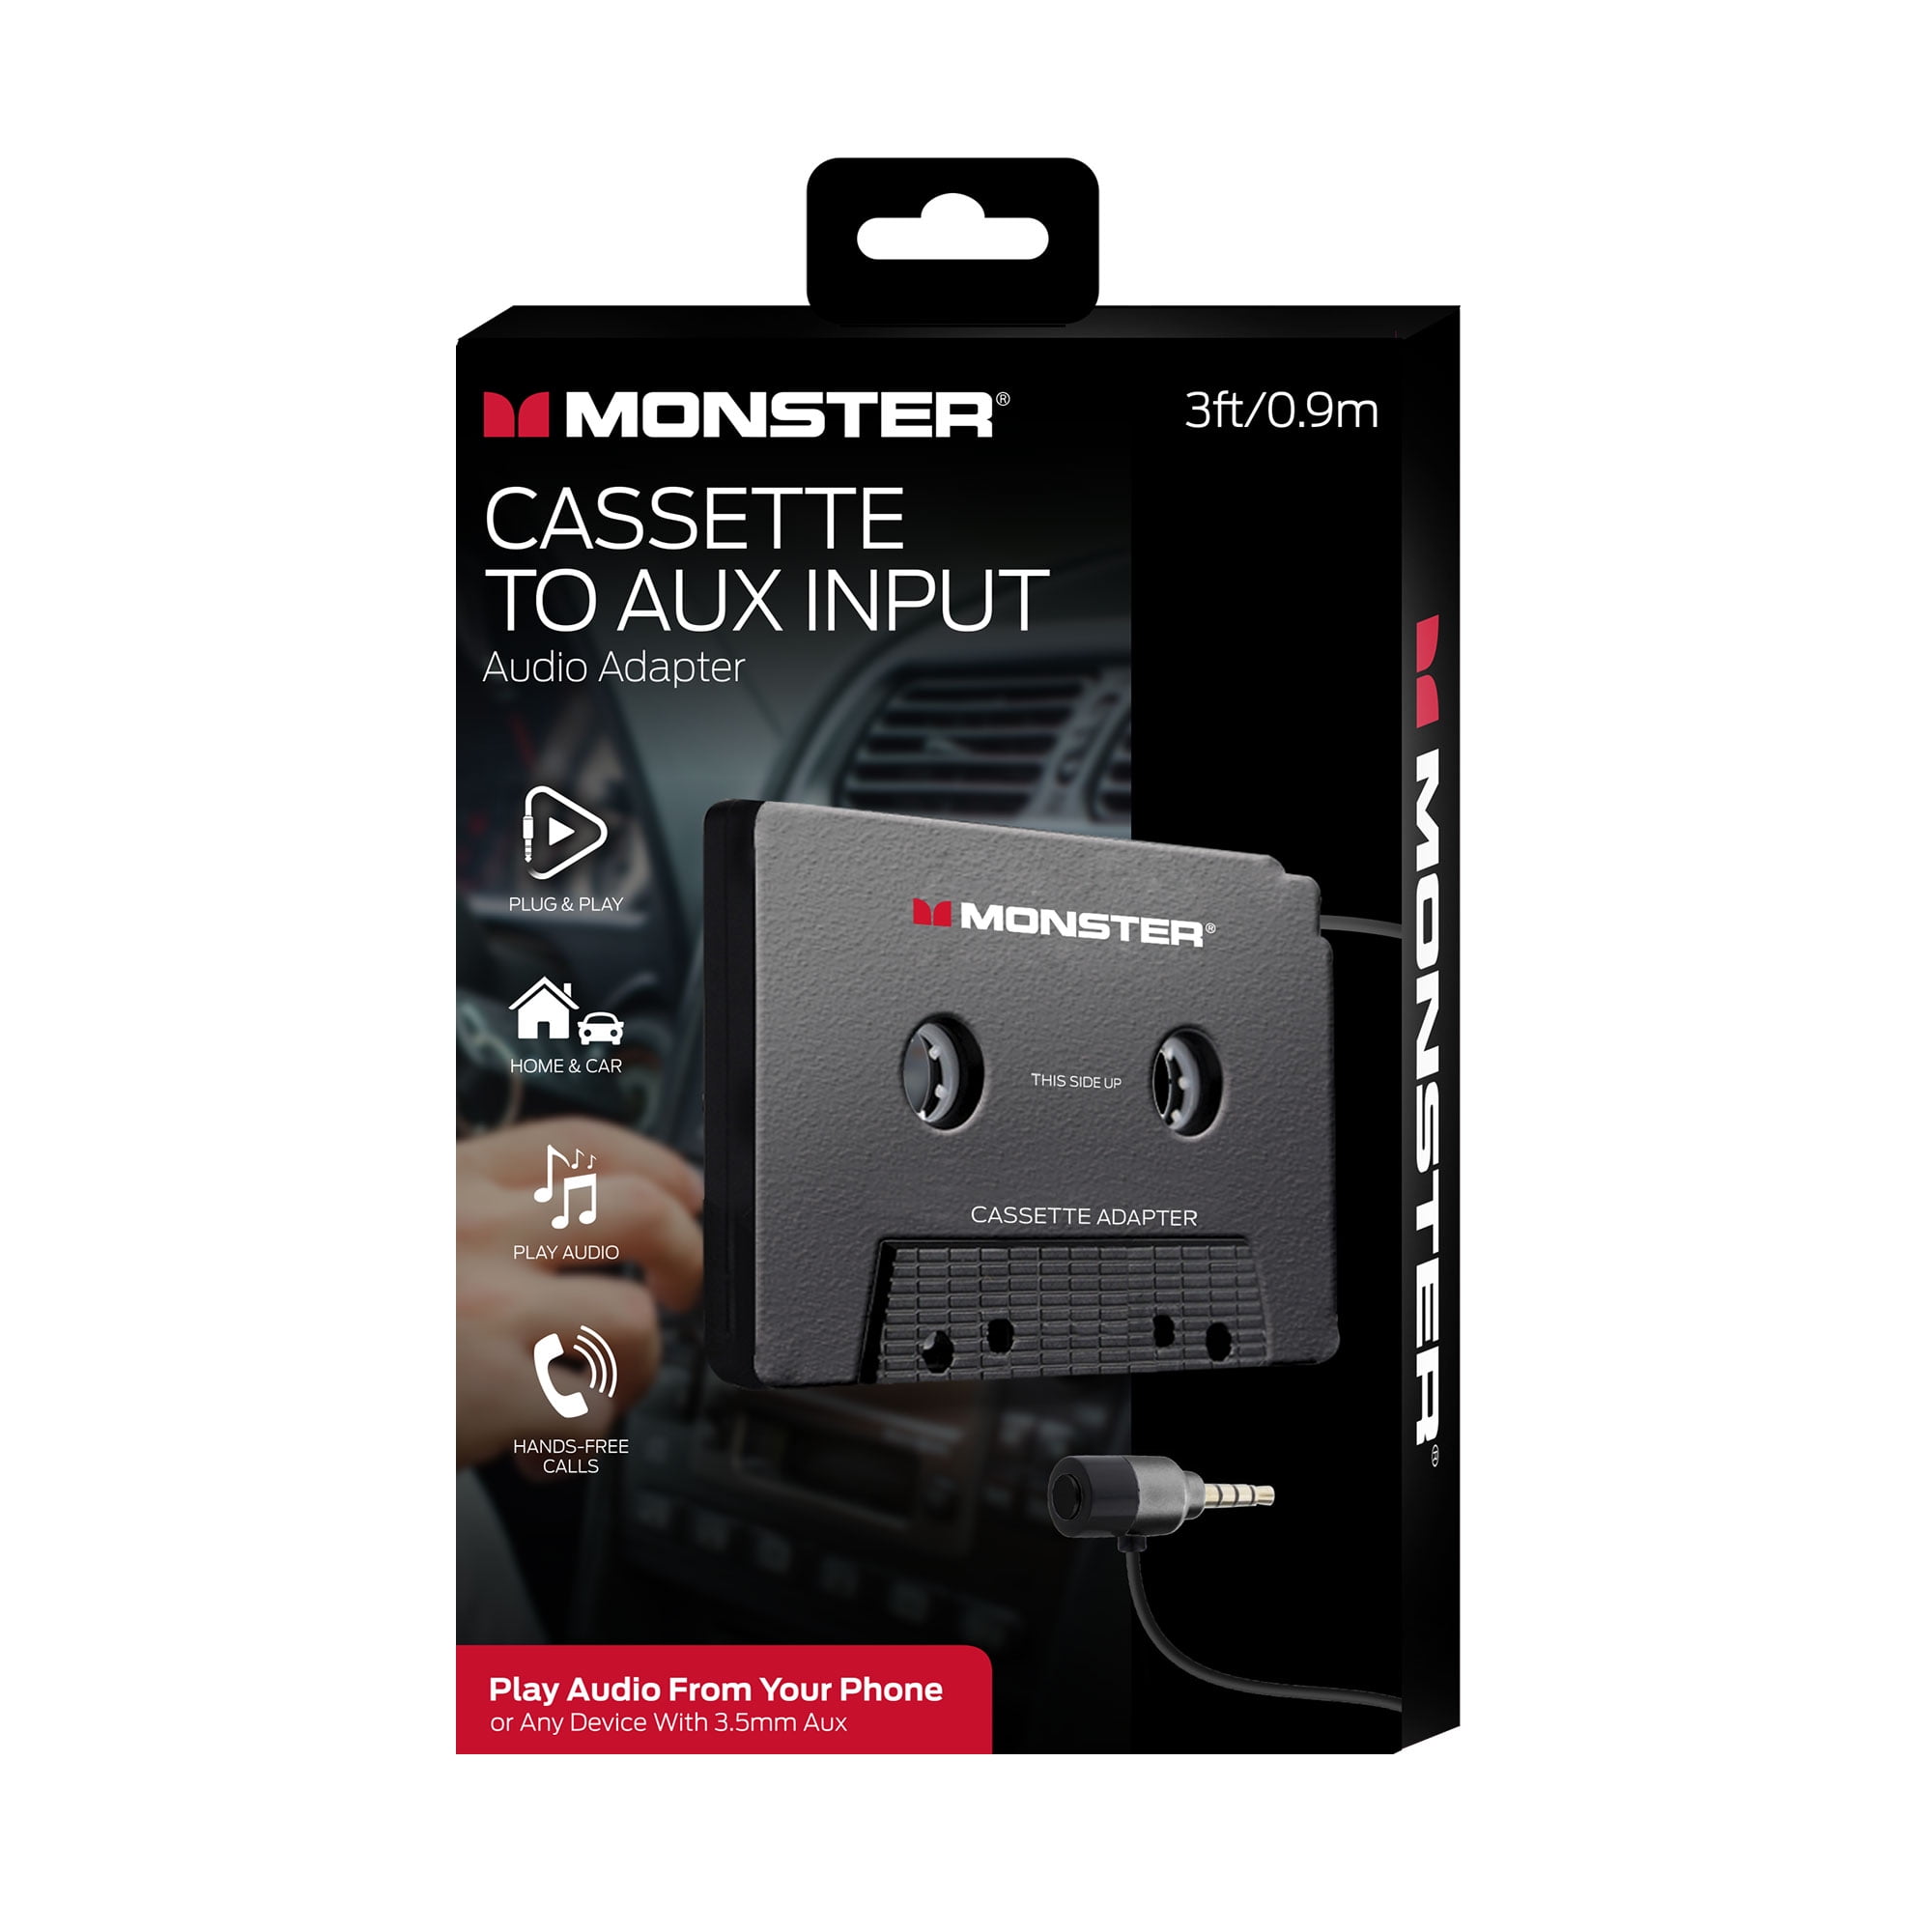 Monster Aux Cord Cassette Adapter 800 - iCarPlay for Car Tape Deck,  Auxiliary To Dashboard, MP3 Player, iPod and iPhone - 3 ft Black Cable 